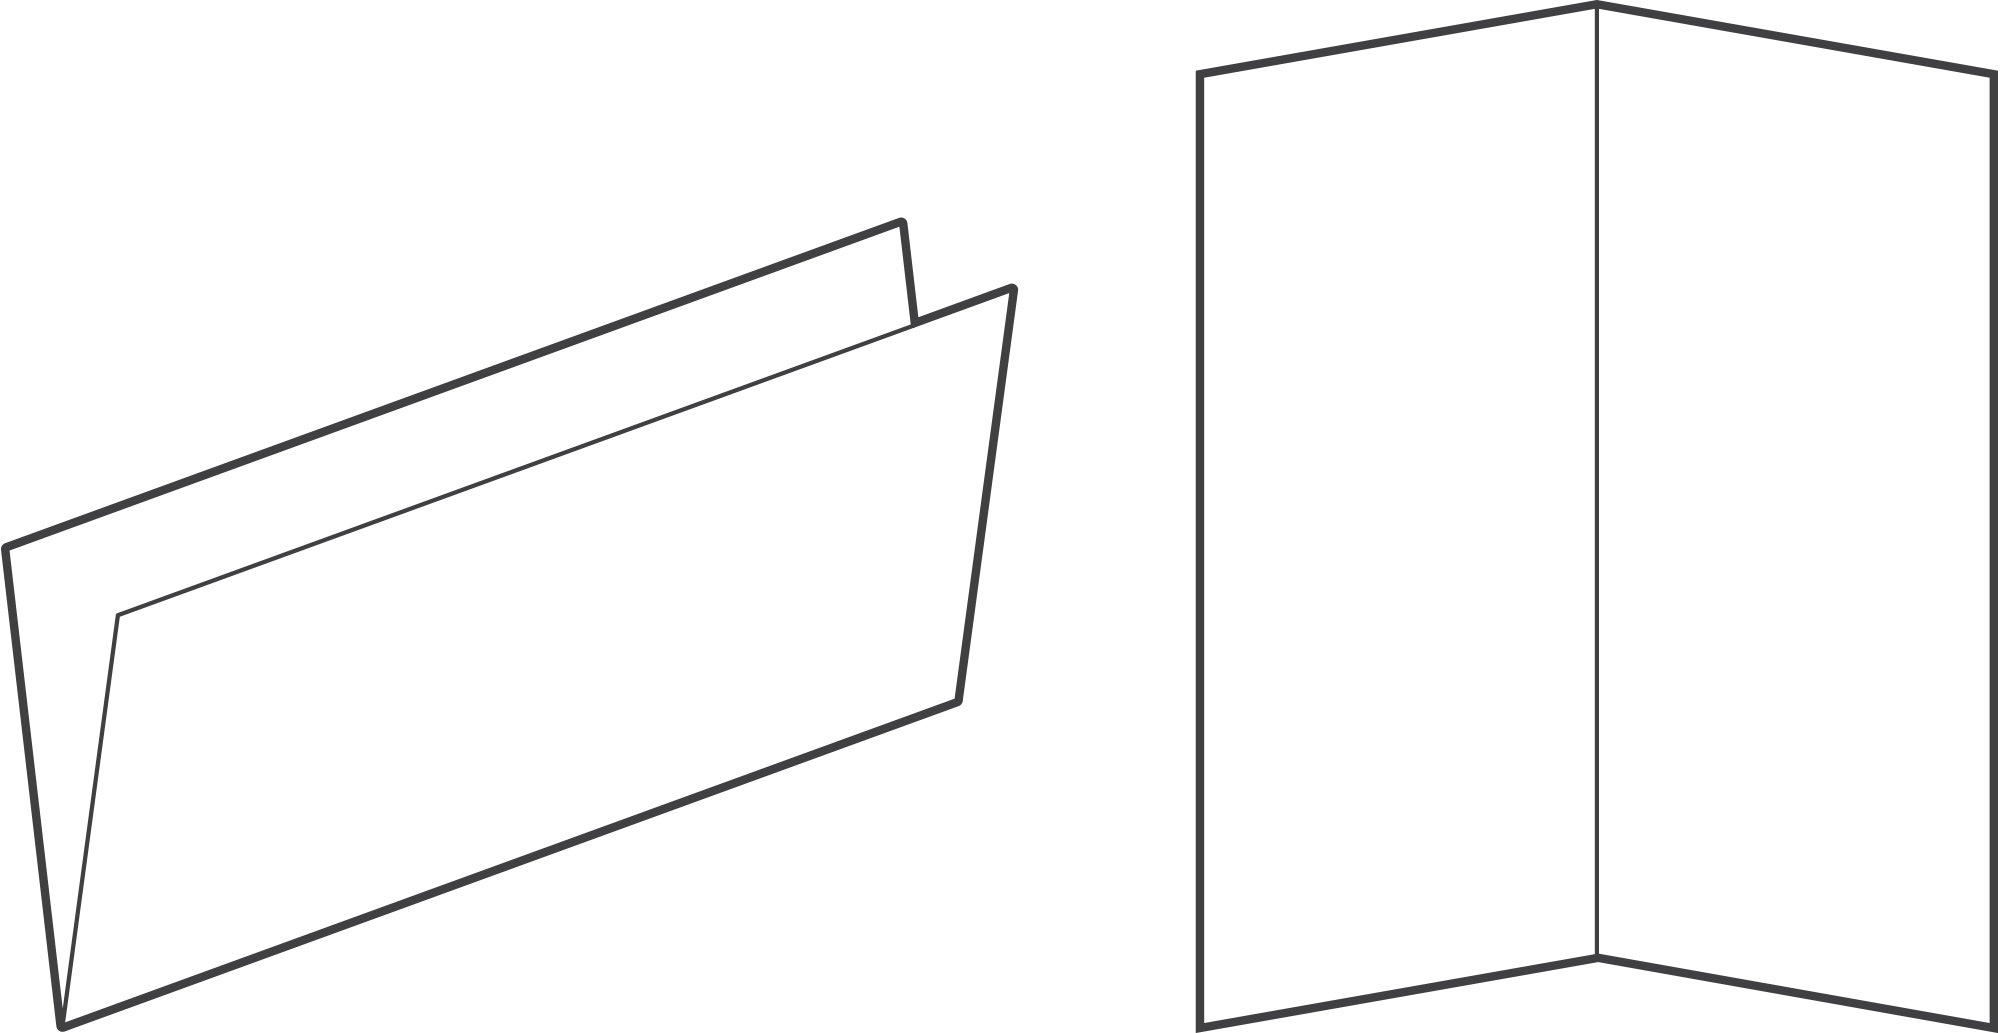 A drawing of this type of postal guide